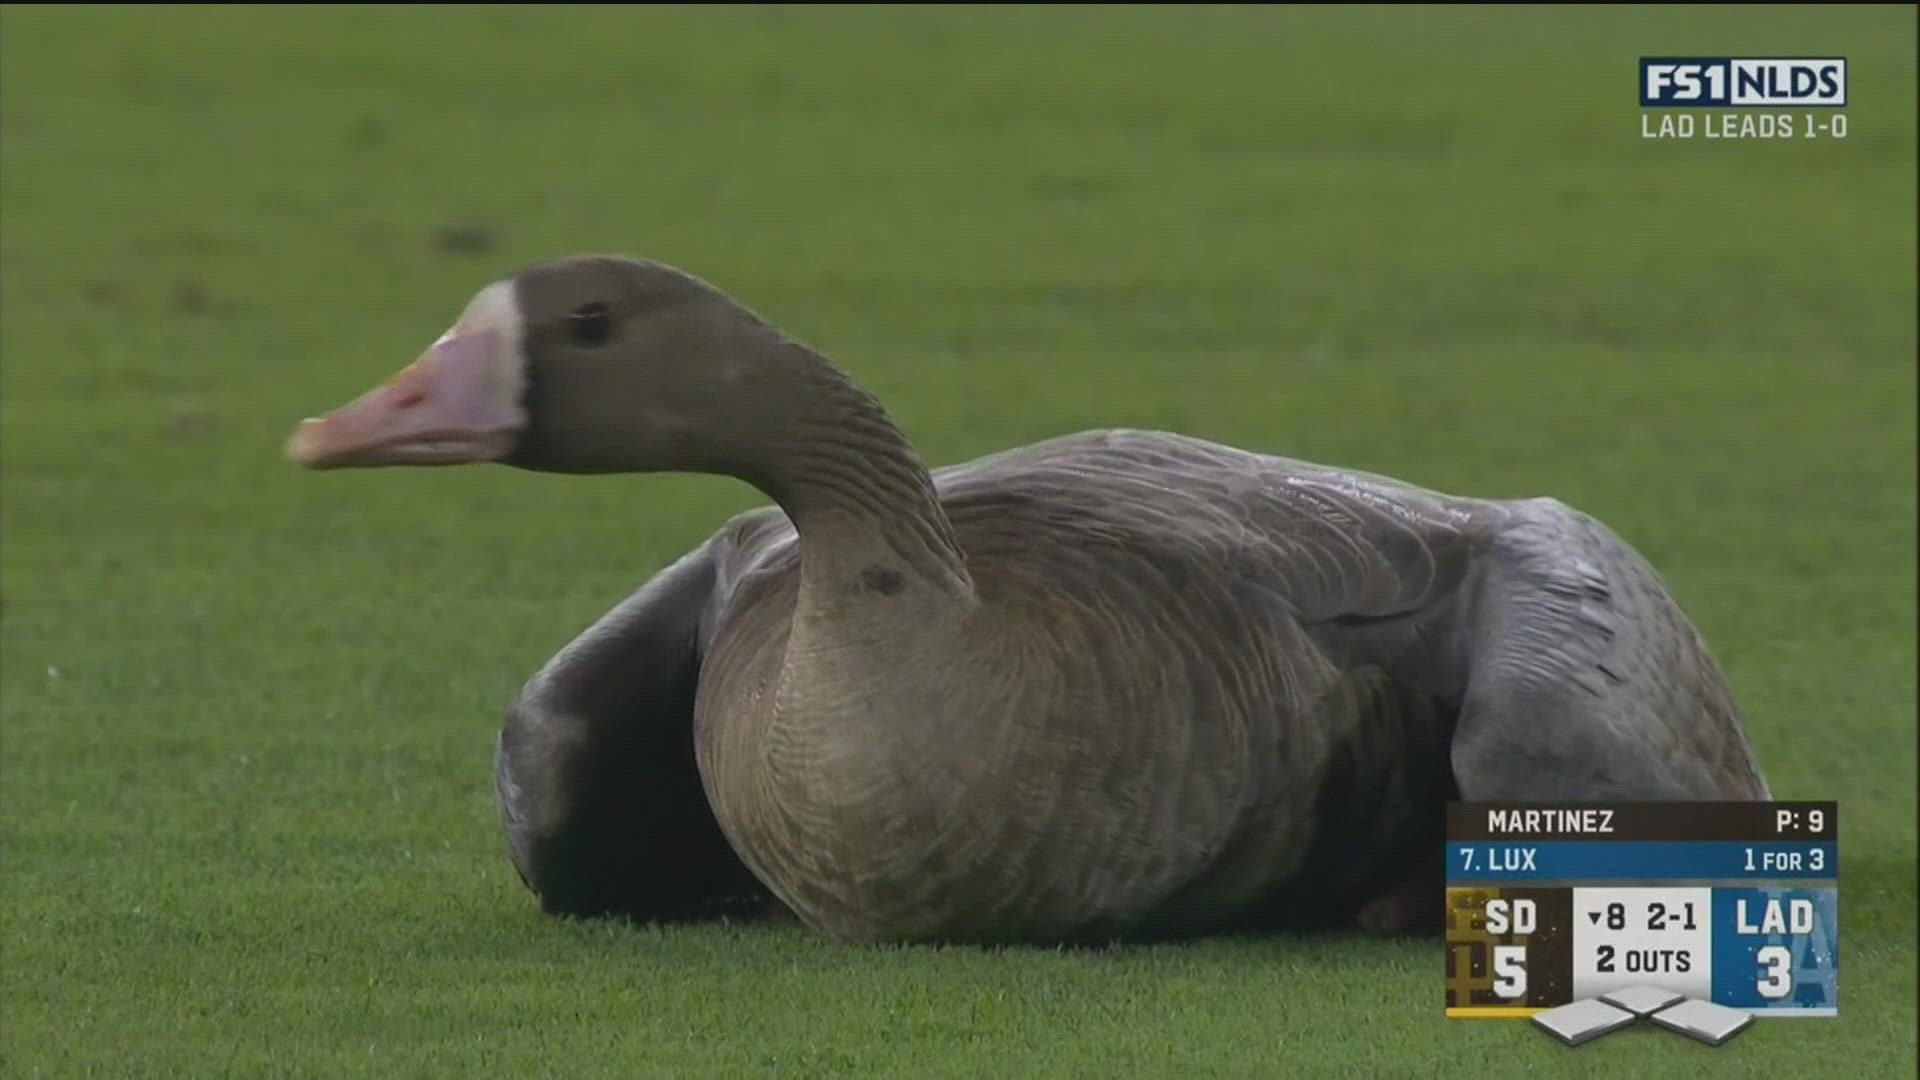 It was the fowl seen around the world, after a goose got loose on the field at Wednesday night Padres vs Dodgers game in Los Angeles and the crowd went crazy.